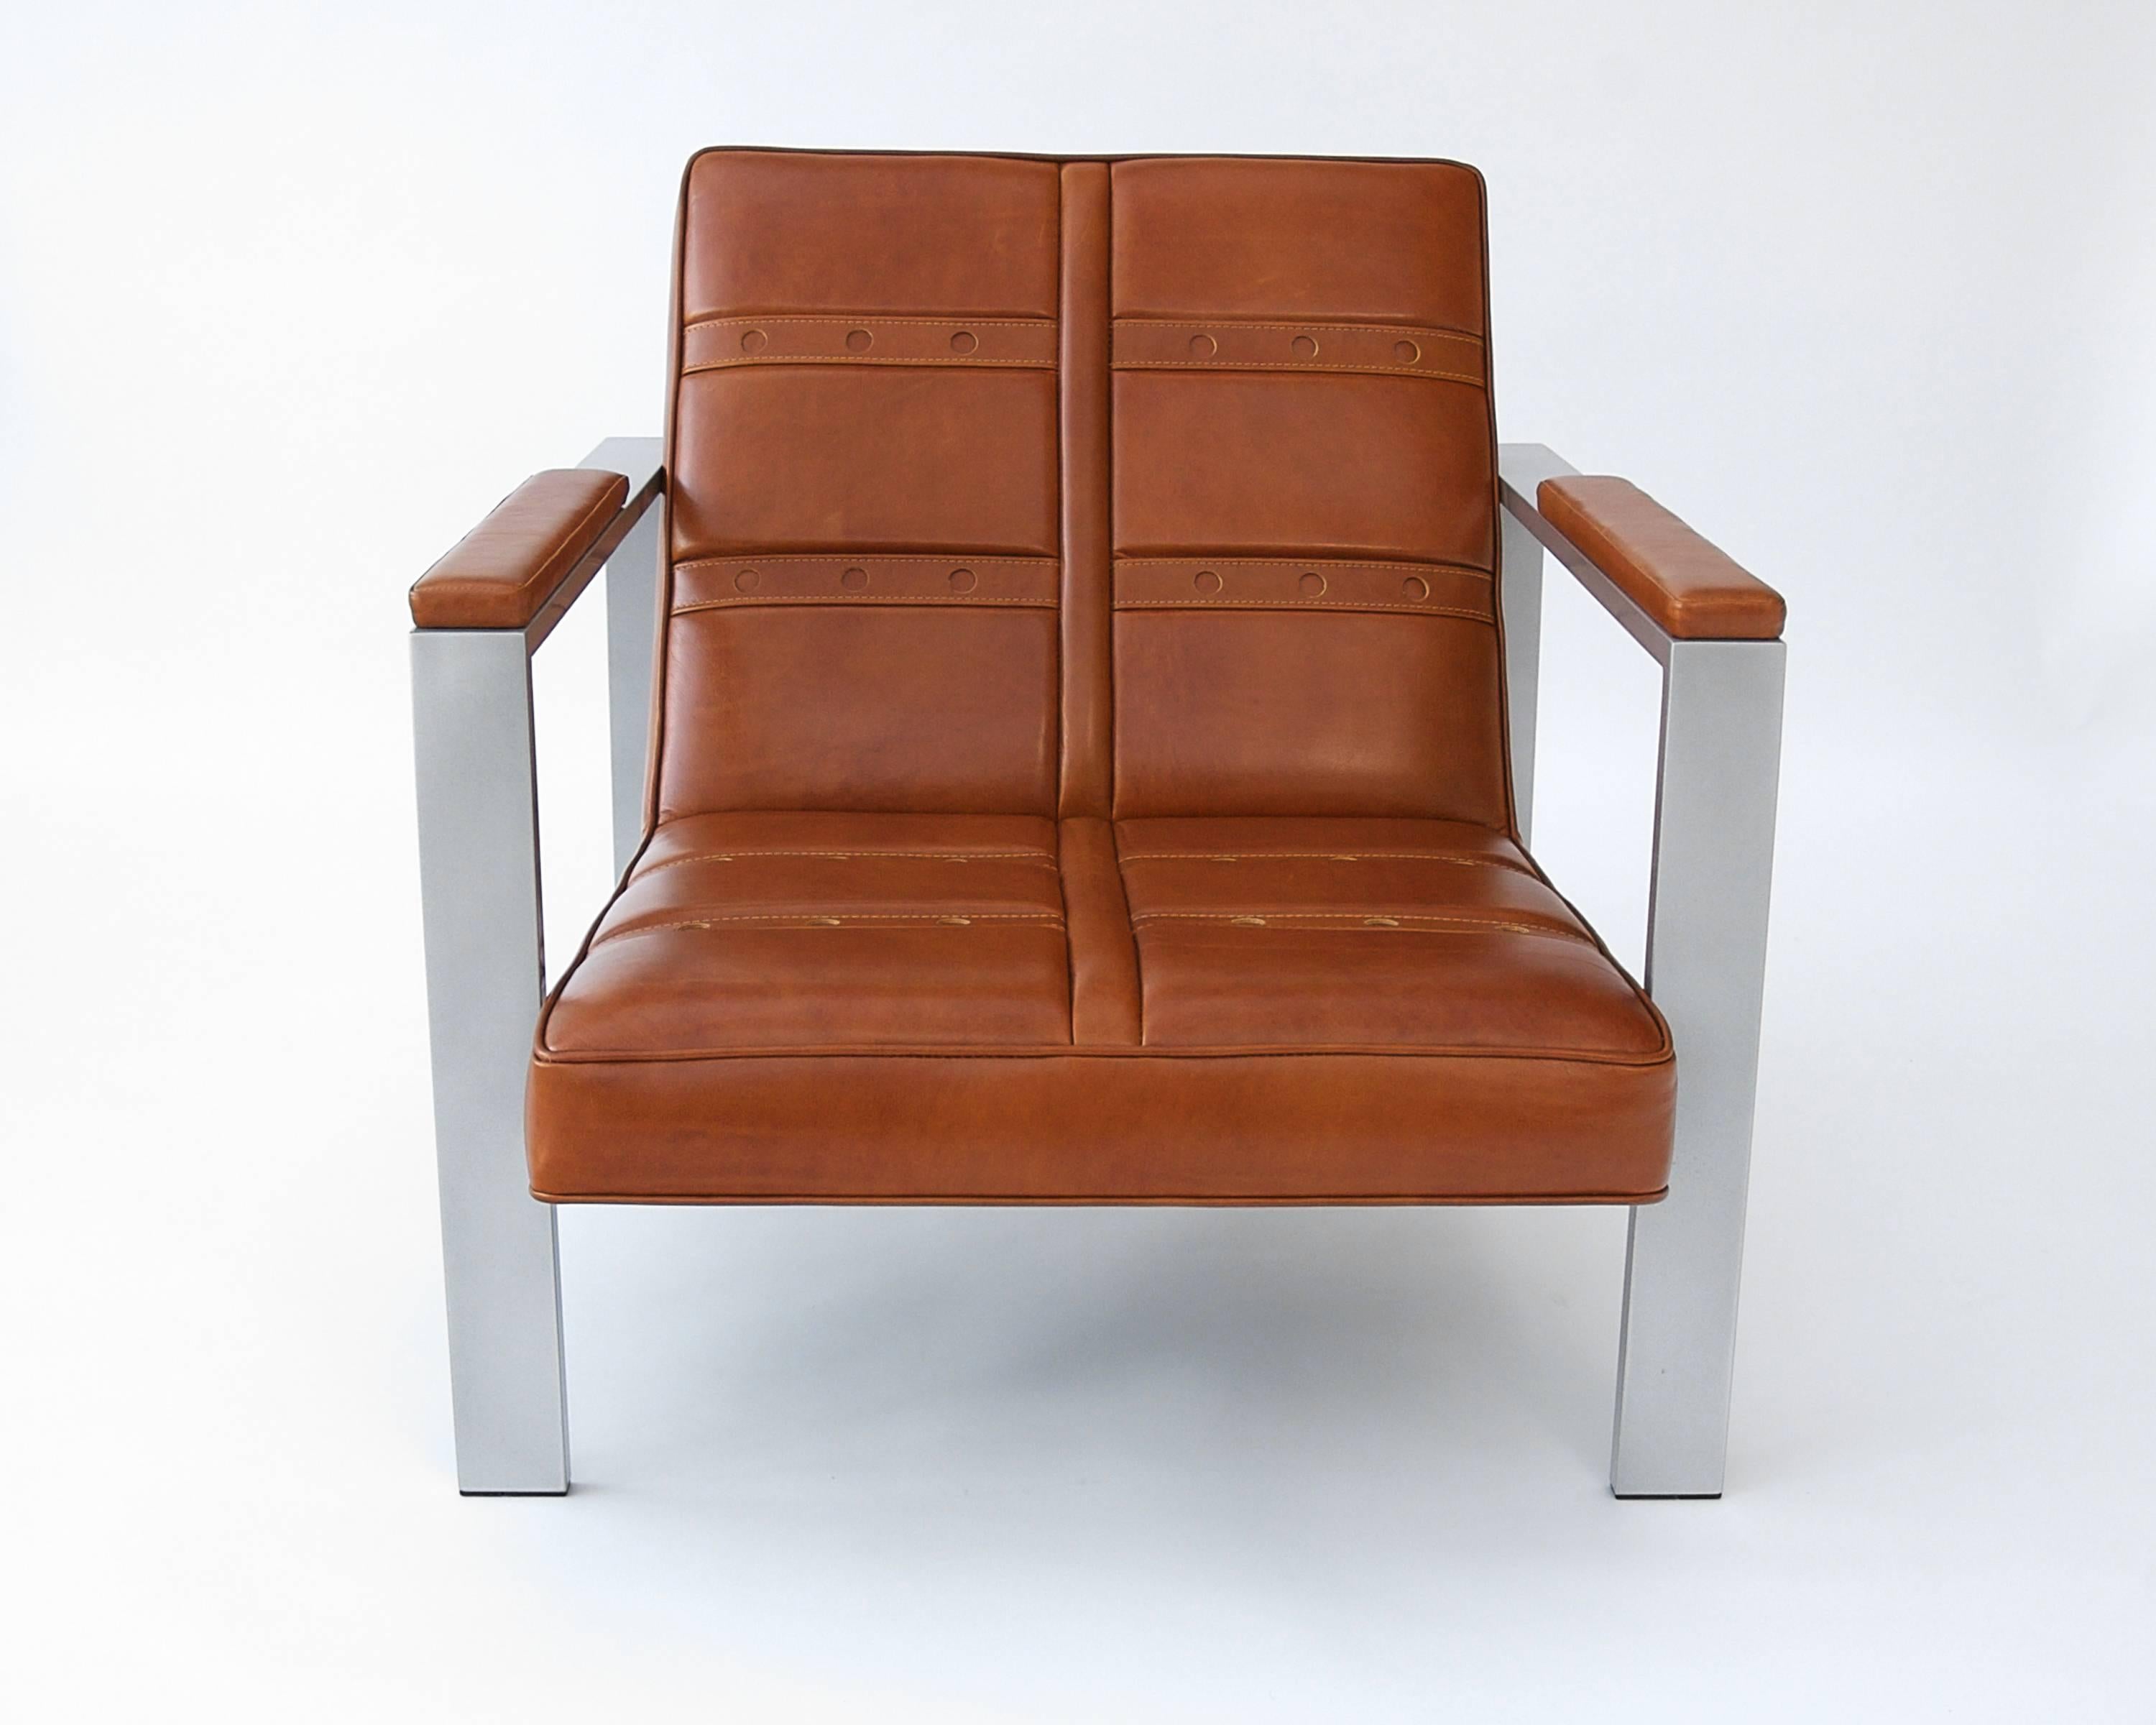 The coupe that seemed to define the true flair of Ferrari, this easy recline Daytona lounge chair is exquisitely inspired from the seat pattern from the Ferrari Daytona Coupe, 1971. With hand waxed whiskey brown leather imported from Italy, custom